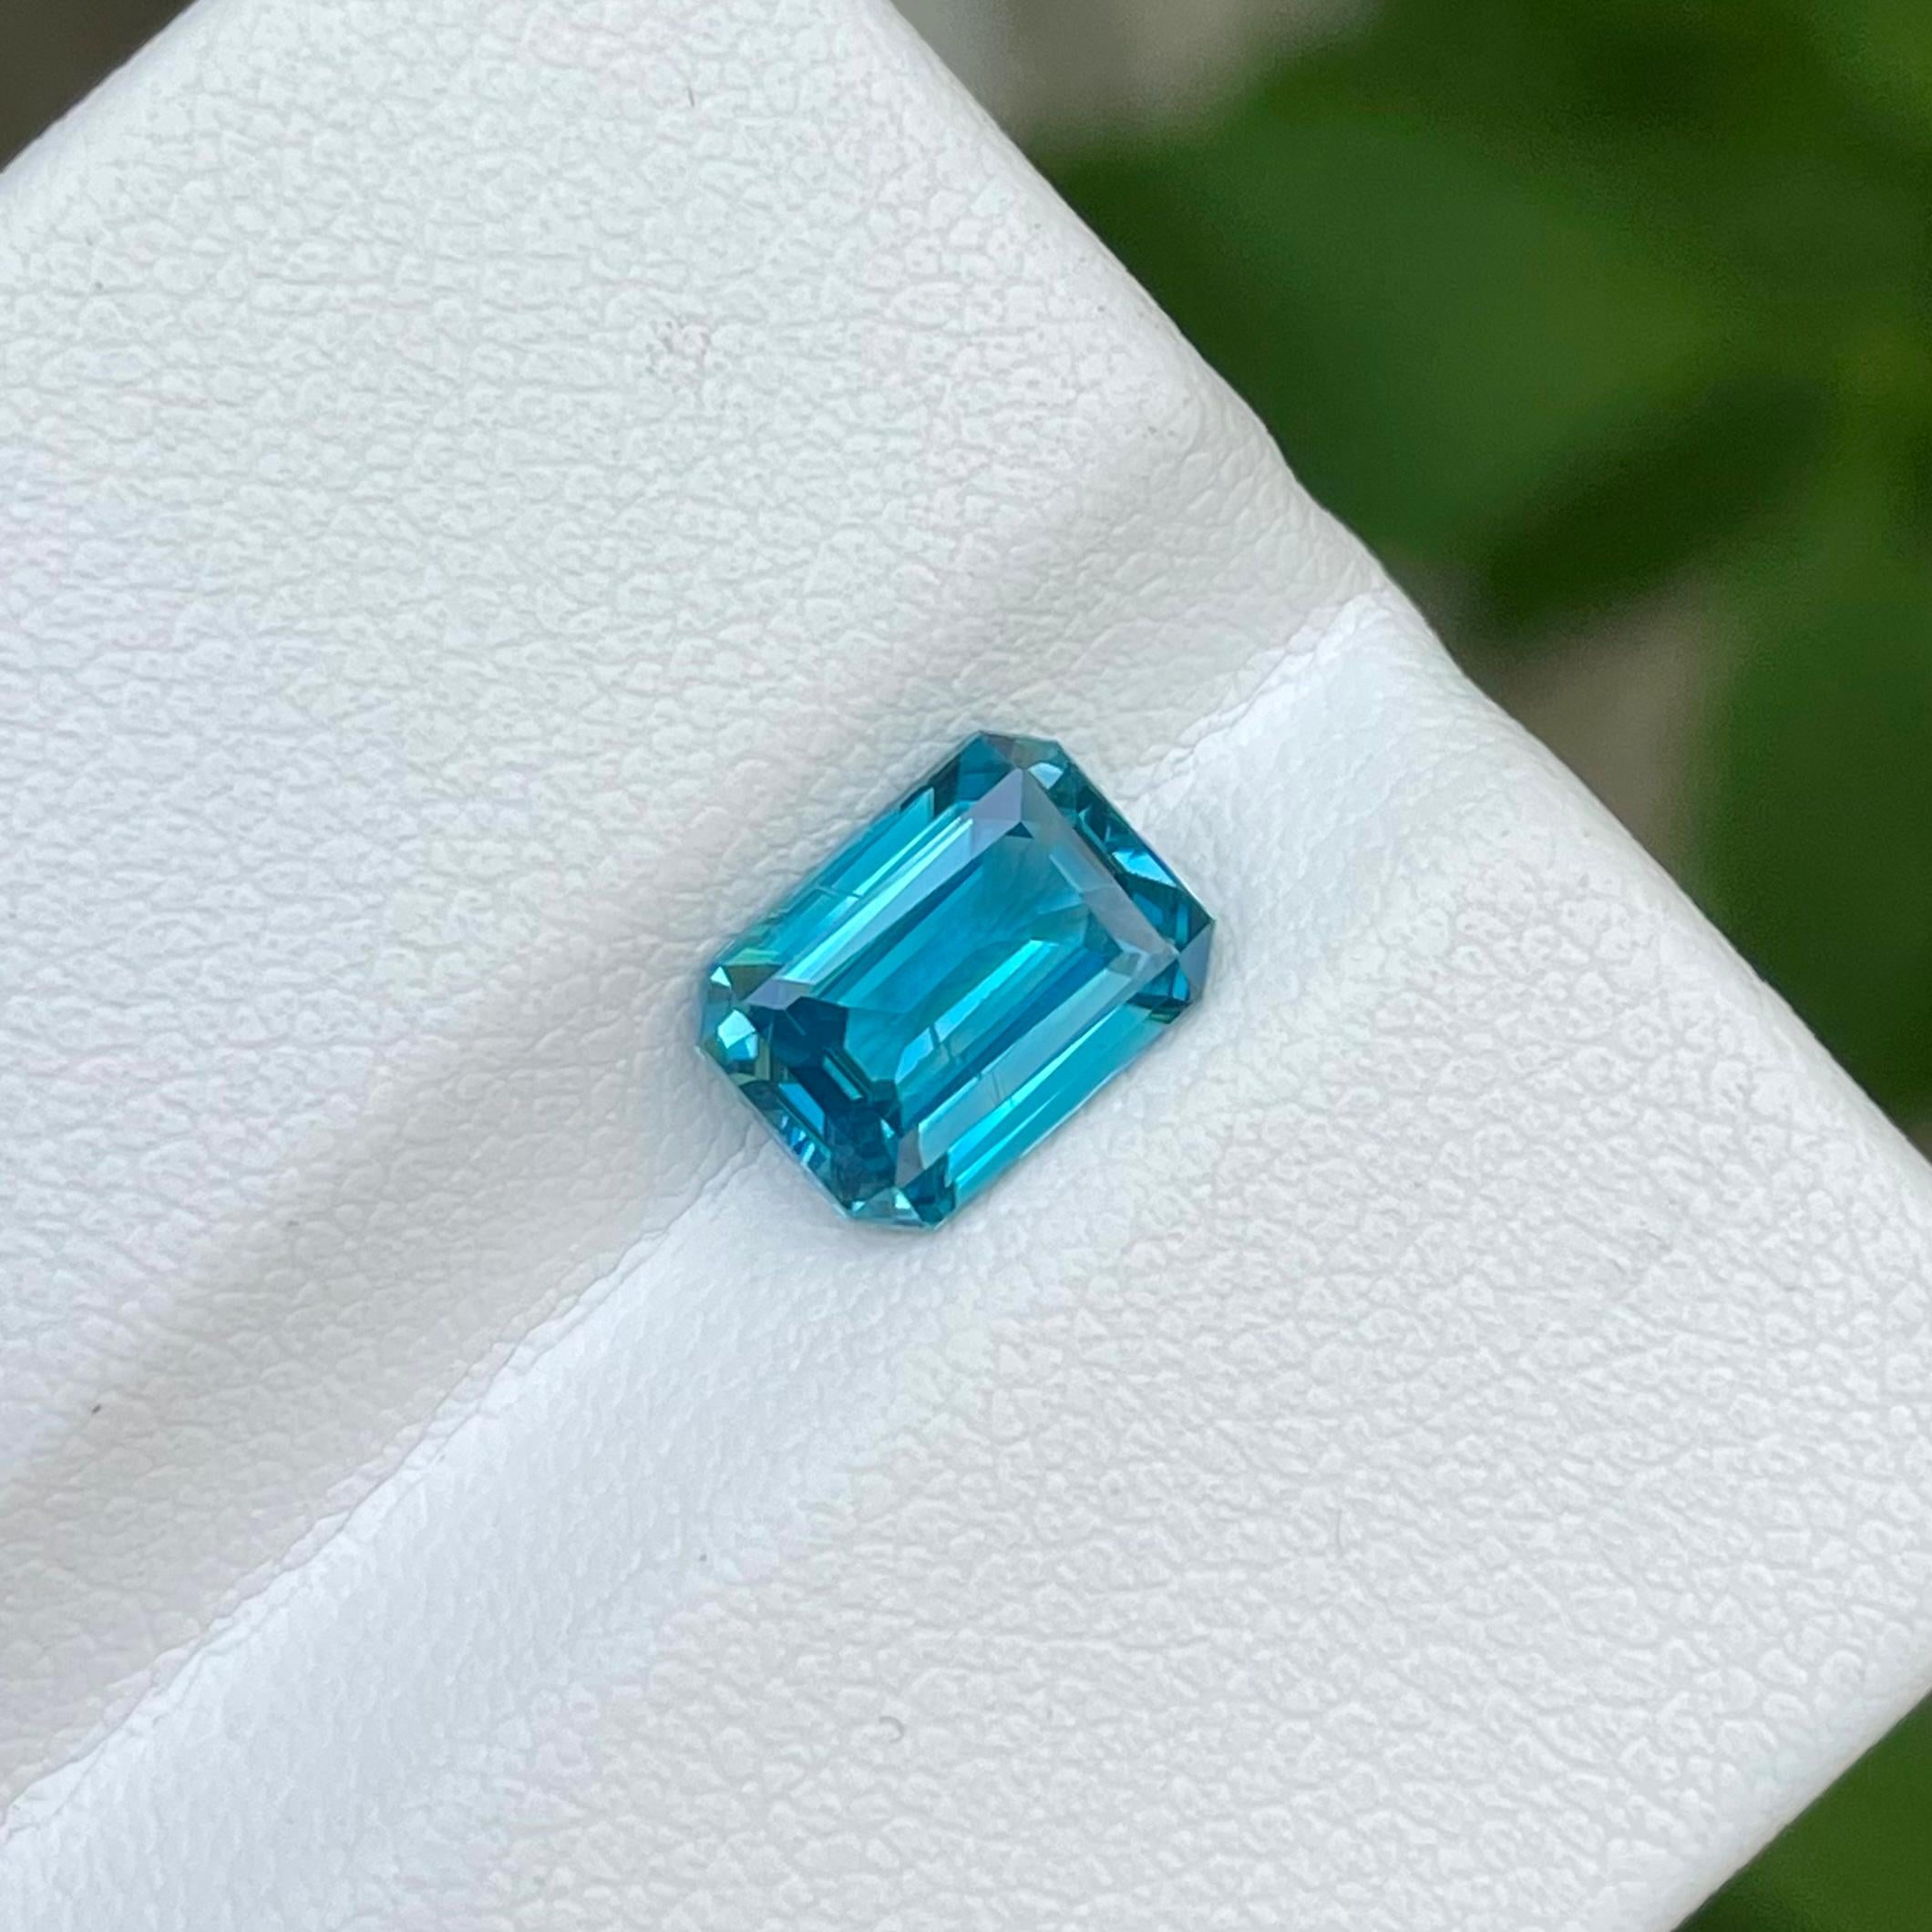 Weight 2.50 carats 
Dimensions 8.4 x 6.2 x 3.8 mm
Treatment None 
Origin Cambodia 
Clarity VVS (Very, Very Slightly Included) 
Shape Octagon 
Cut Emerald



Elevate your jewelry collection with the exquisite beauty of a 2.50 carat Natural Cambodian